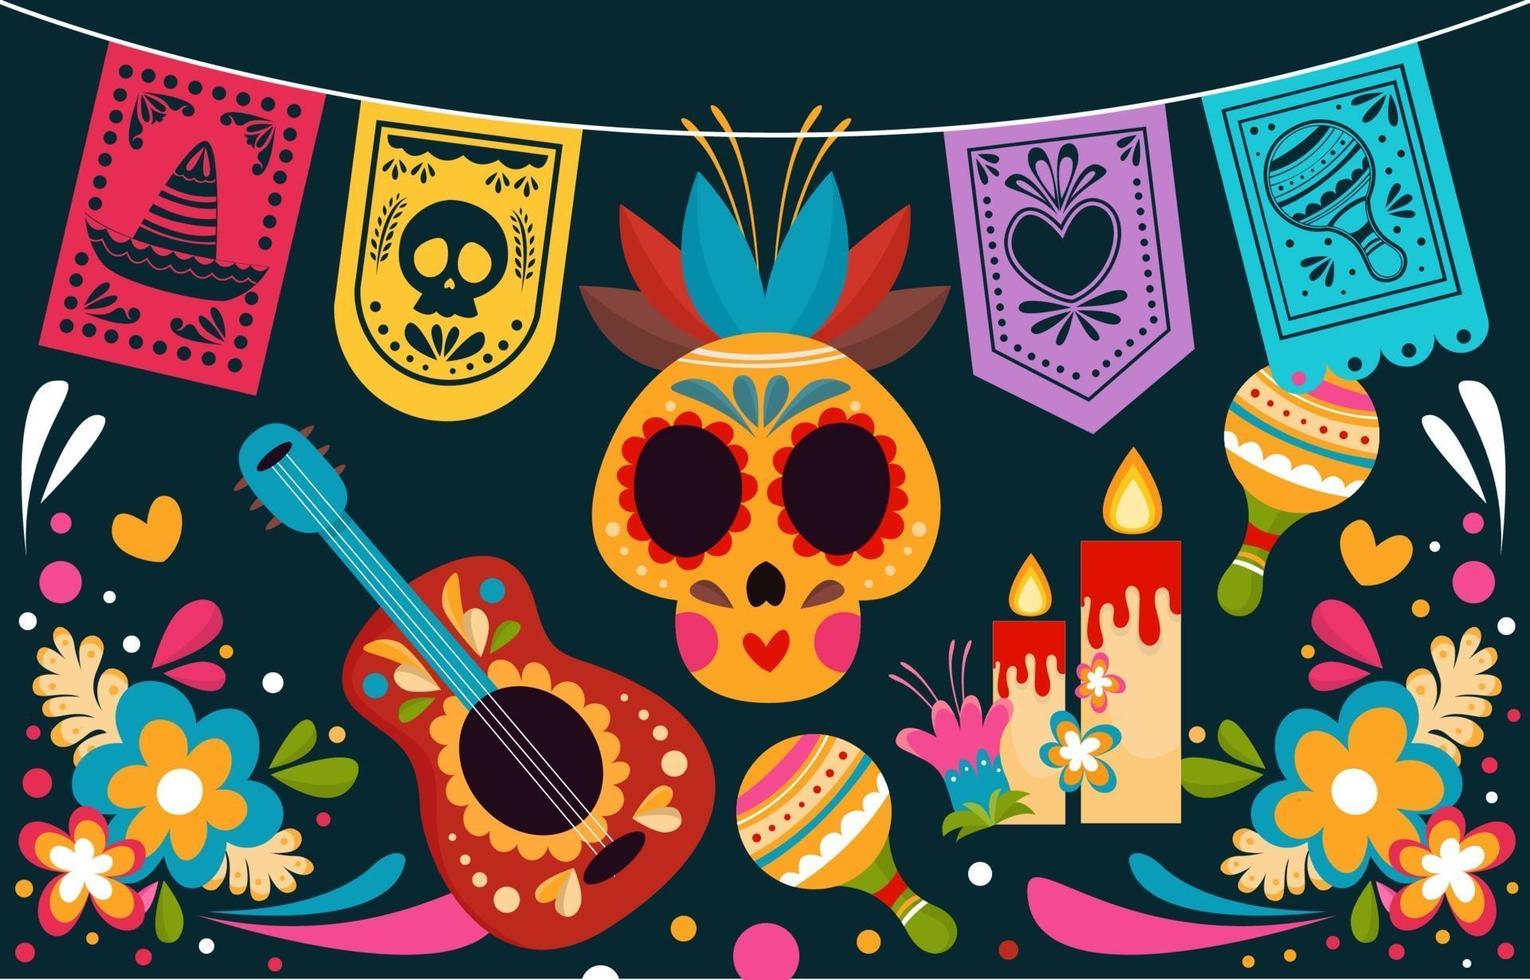 Day of the Dead Background vector